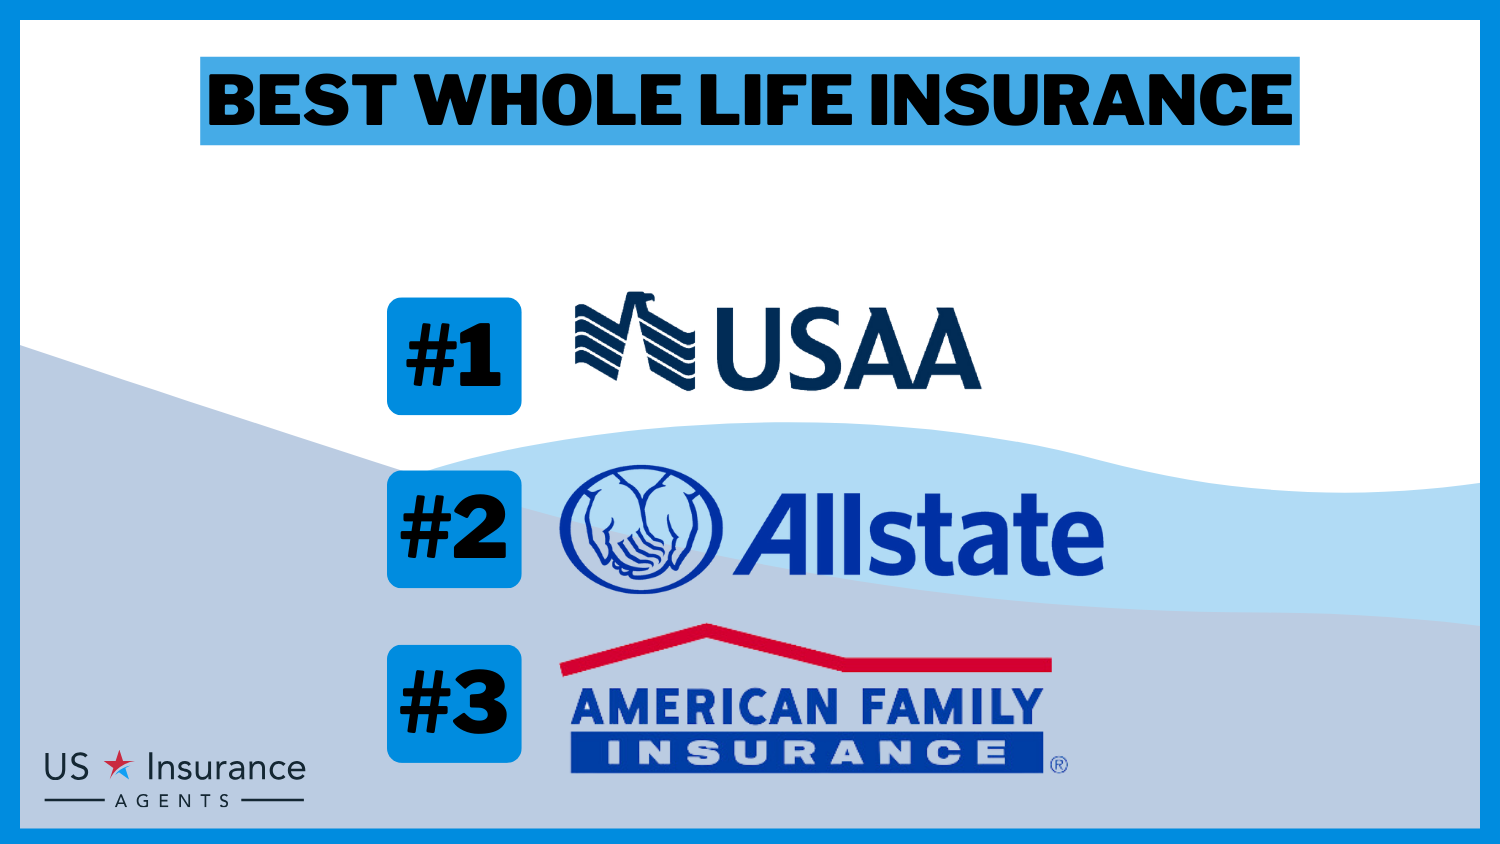 USAA, Allstate, American Family: Best Whole Life Insurance